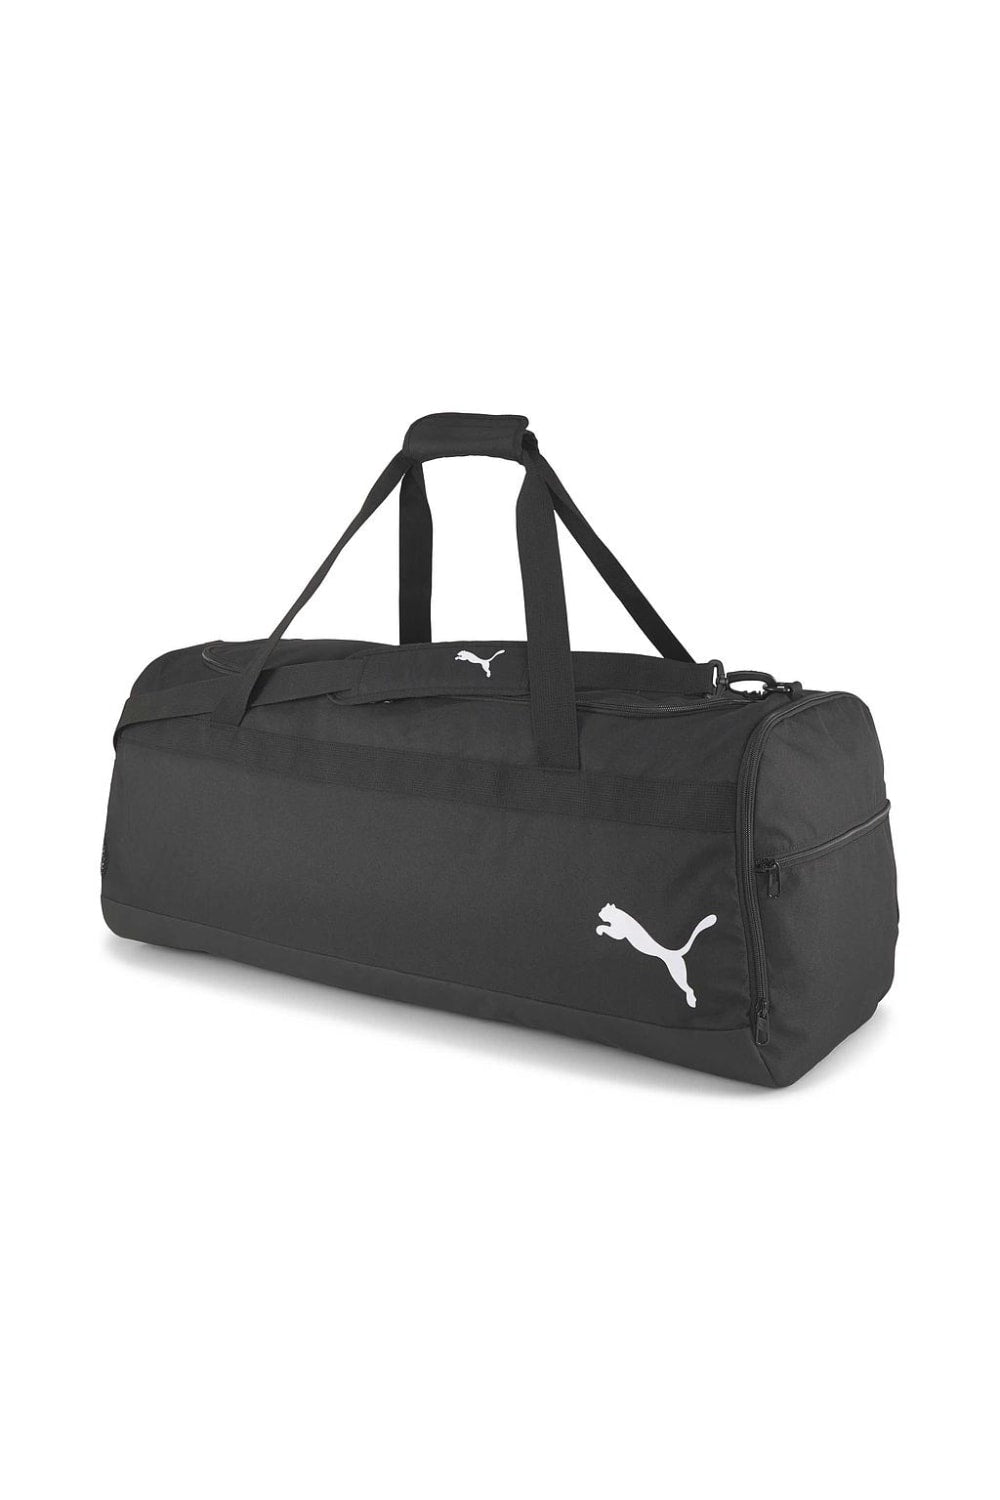 Extra Large Duffel Bag with Wheels